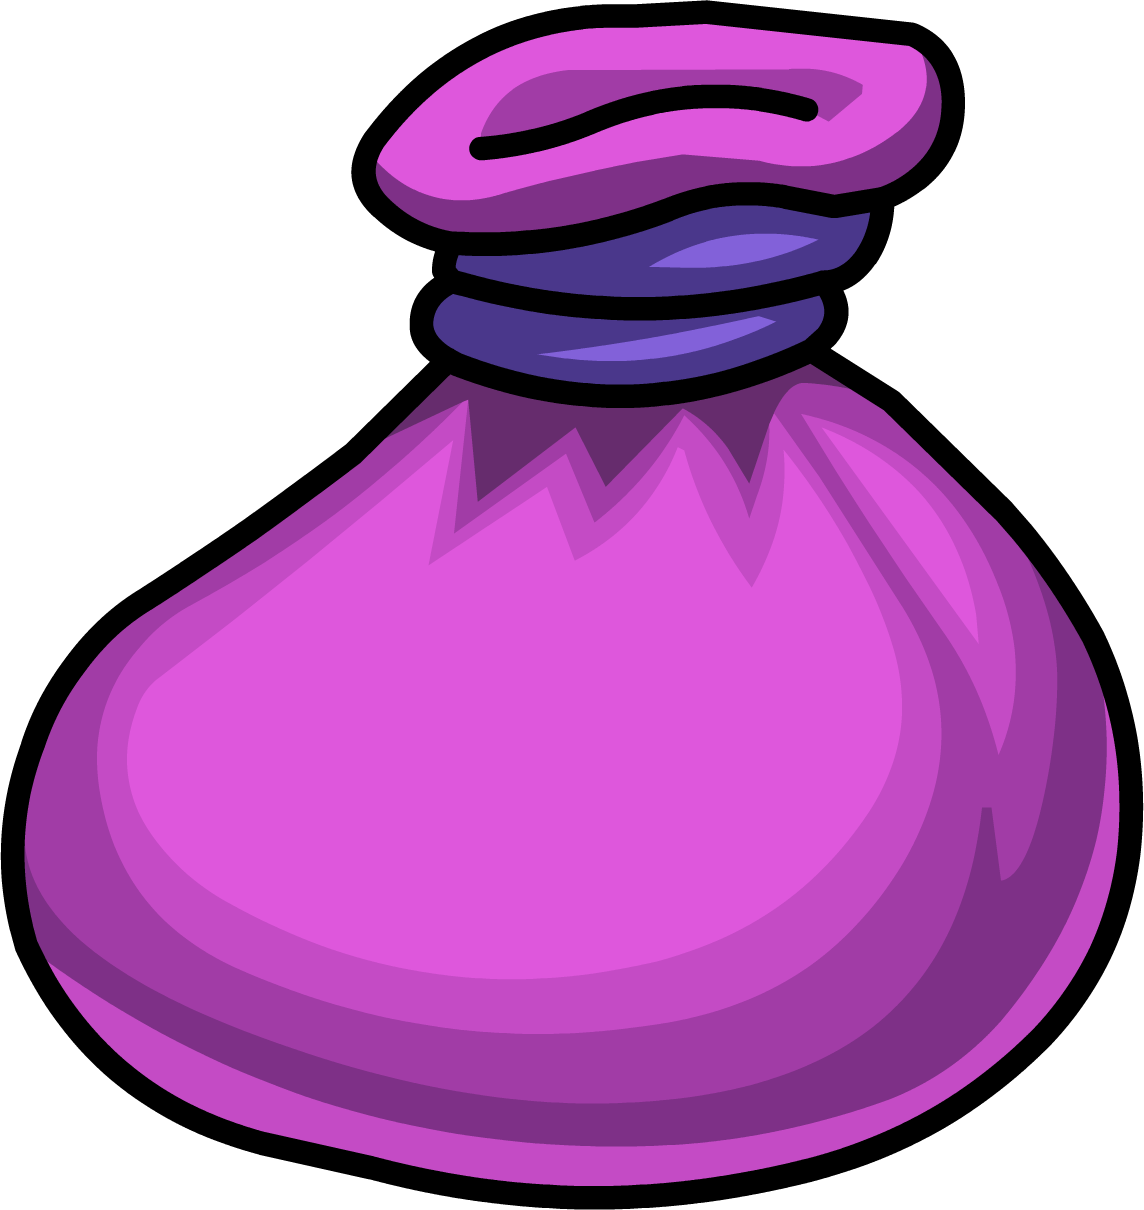 poison clipart potion ingredient